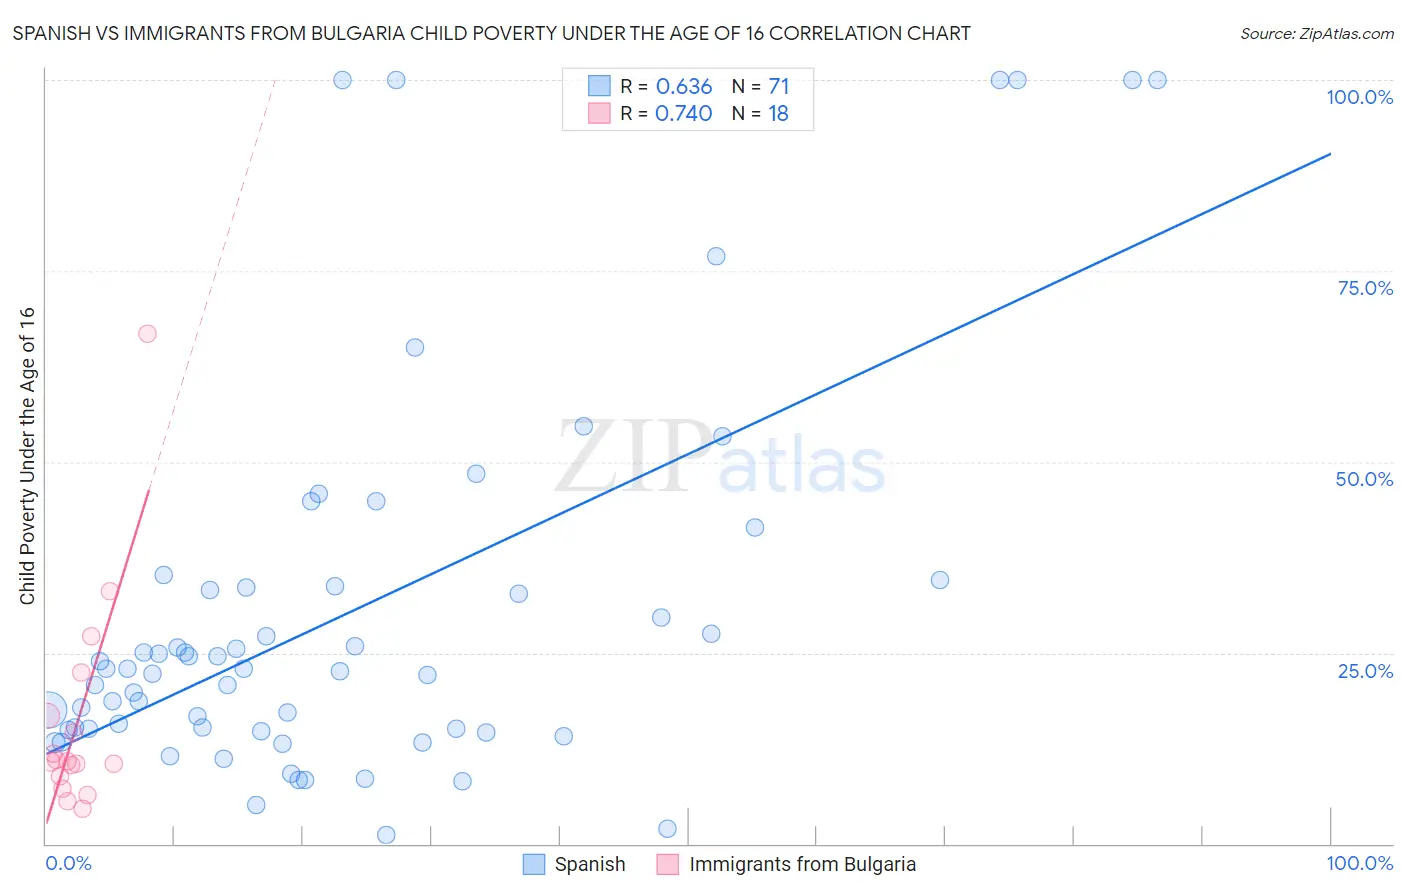 Spanish vs Immigrants from Bulgaria Child Poverty Under the Age of 16